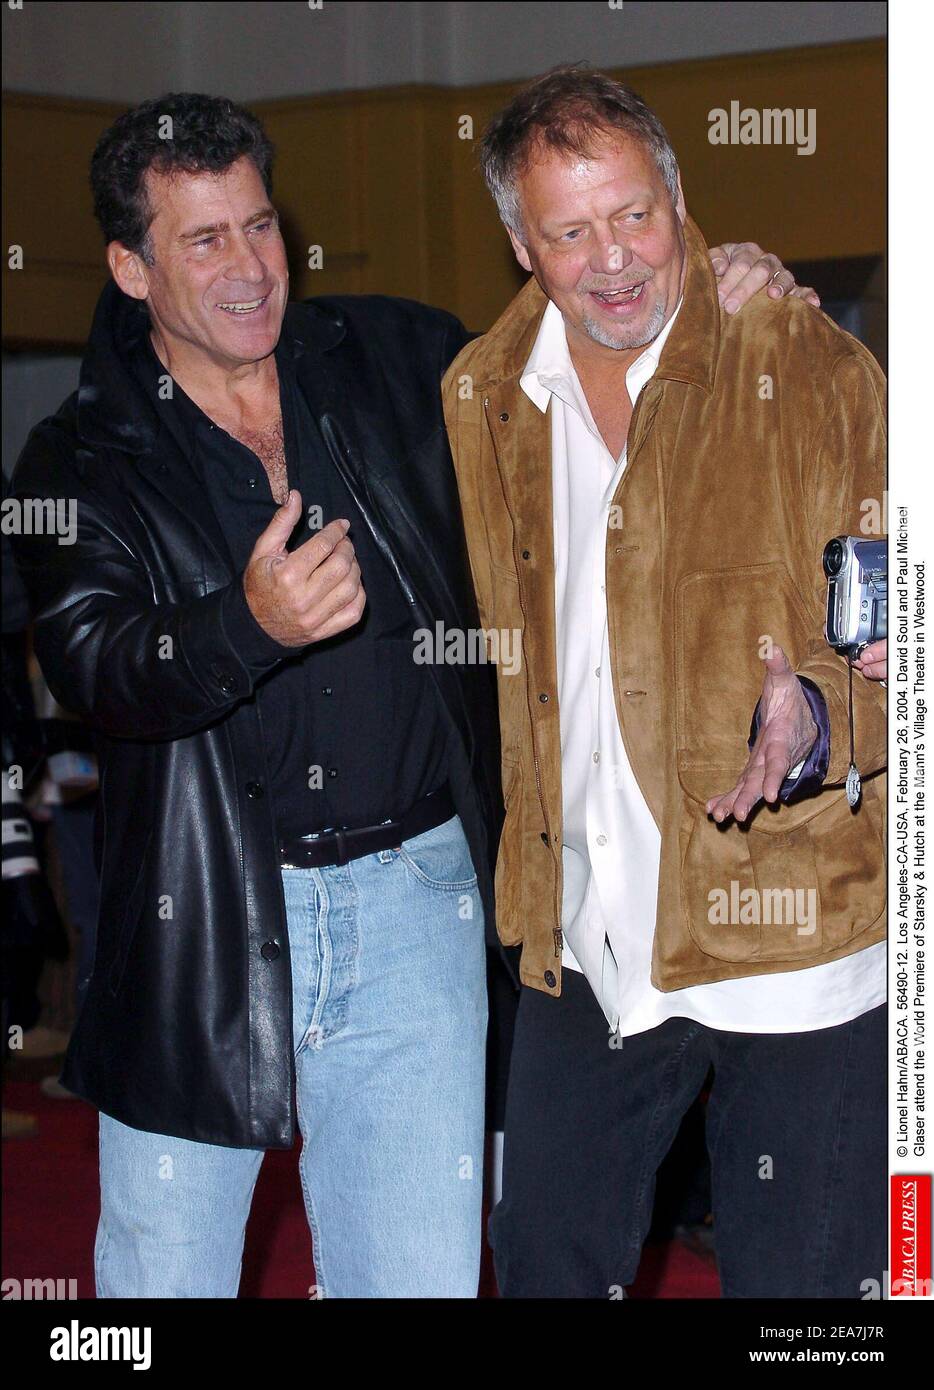 © Lionel Hahn/ABACA. 56490-12. Los Angeles-CA-USA, February 26, 2004. David Soul and Paul Michael Glaser attend the World Premiere of Starsky & Hutch at the Mann's Village Theatre in Westwood. Stock Photo